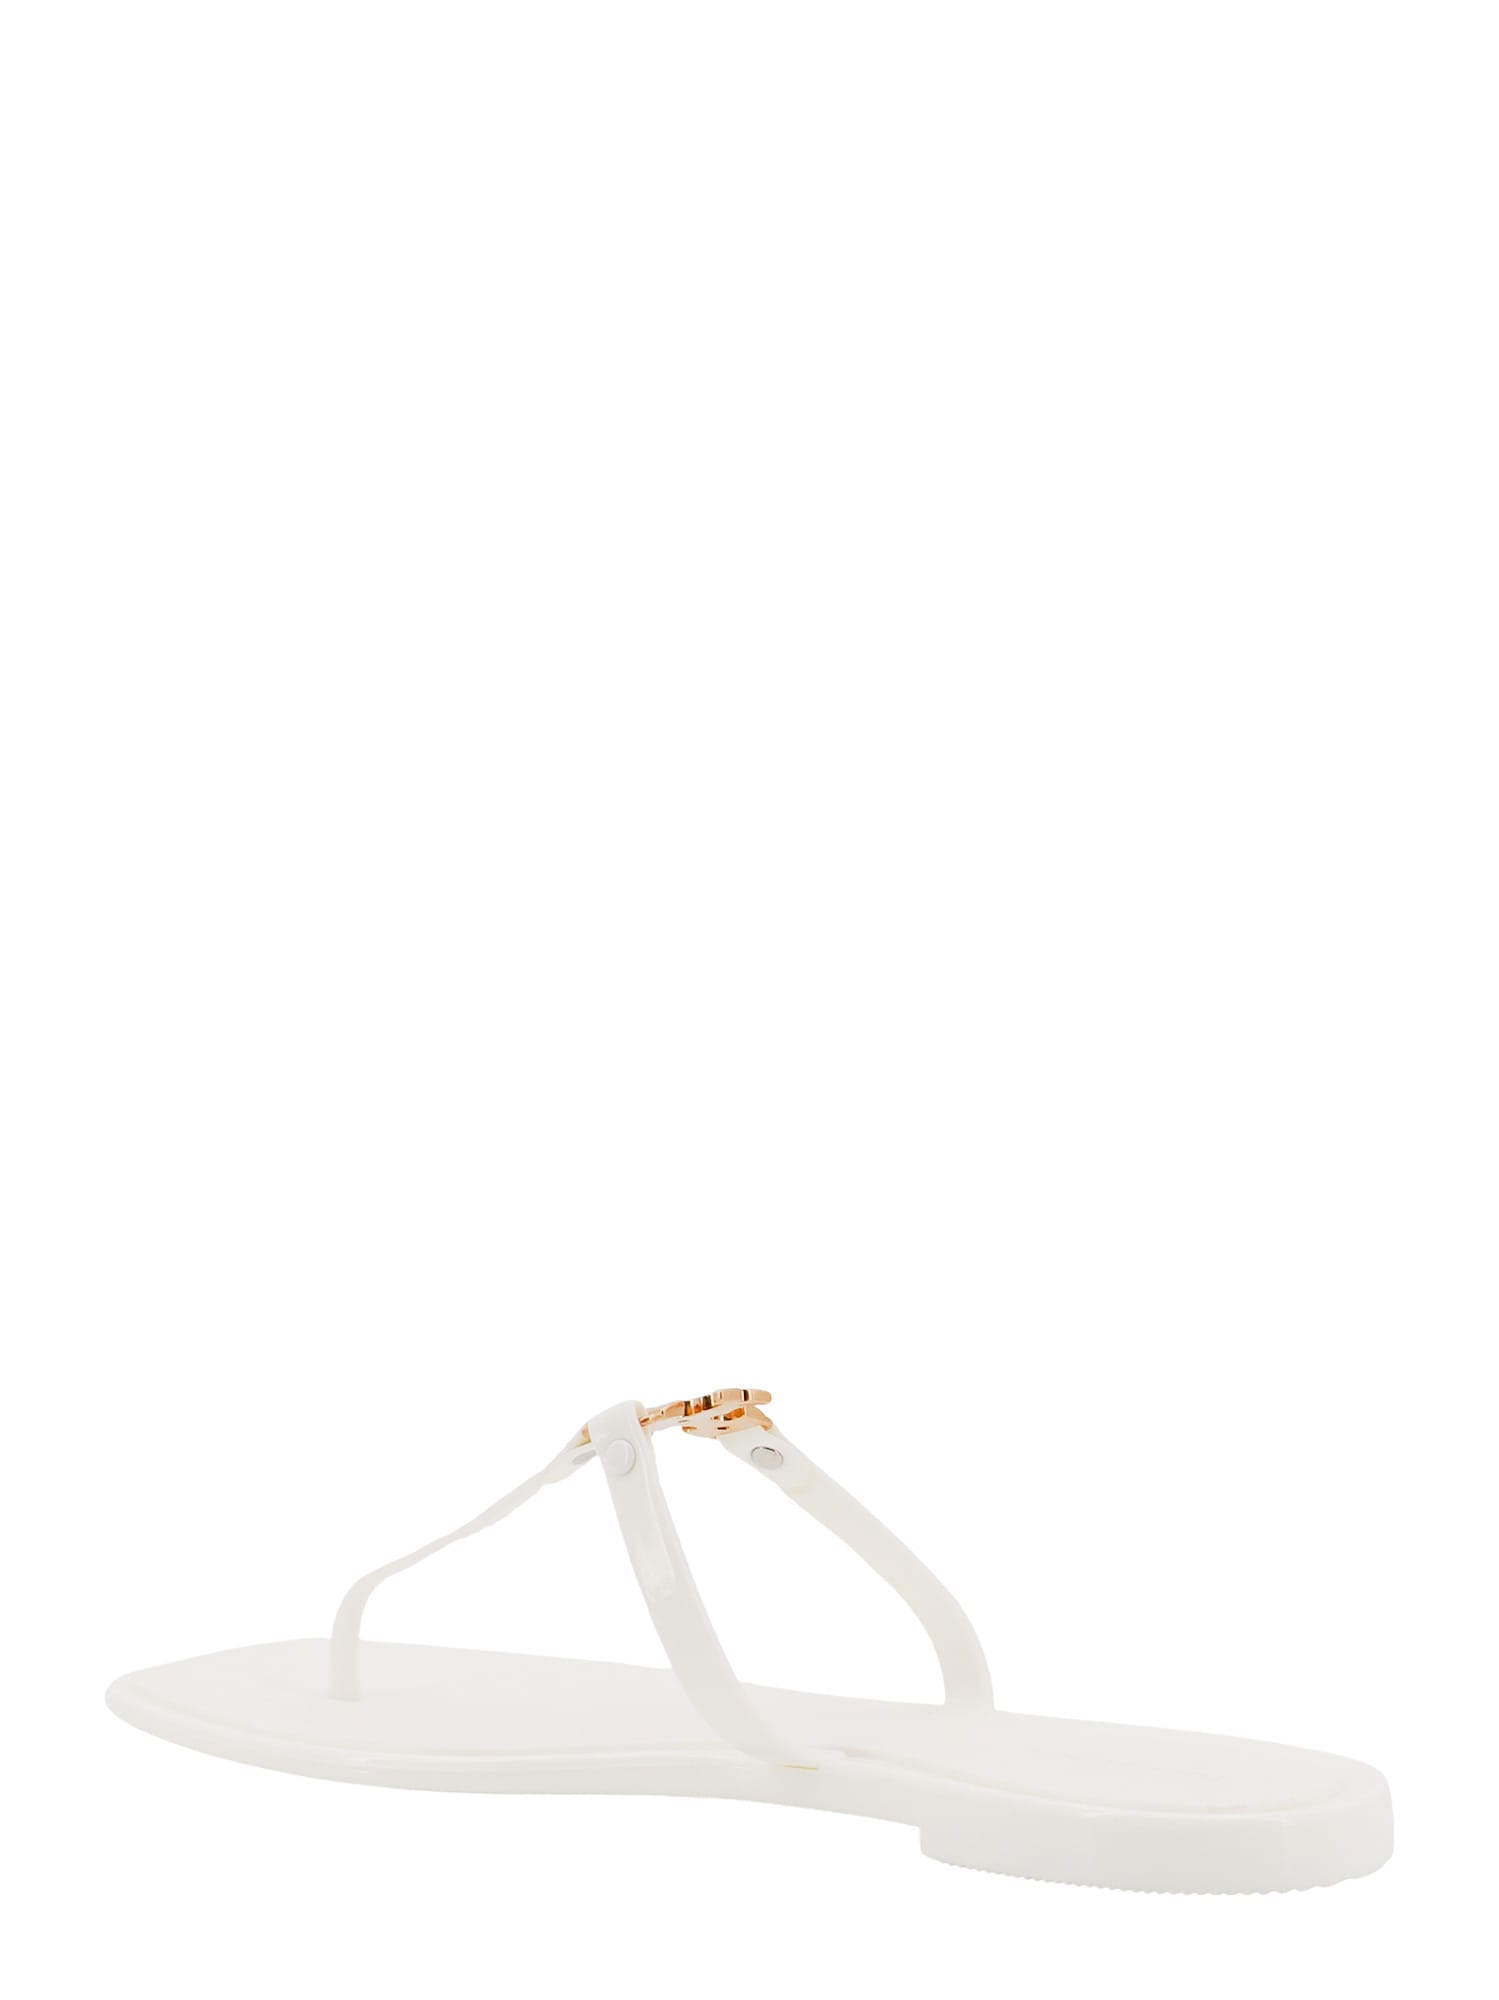 Shop Tory Burch Roxanne Jelly Sandals In White